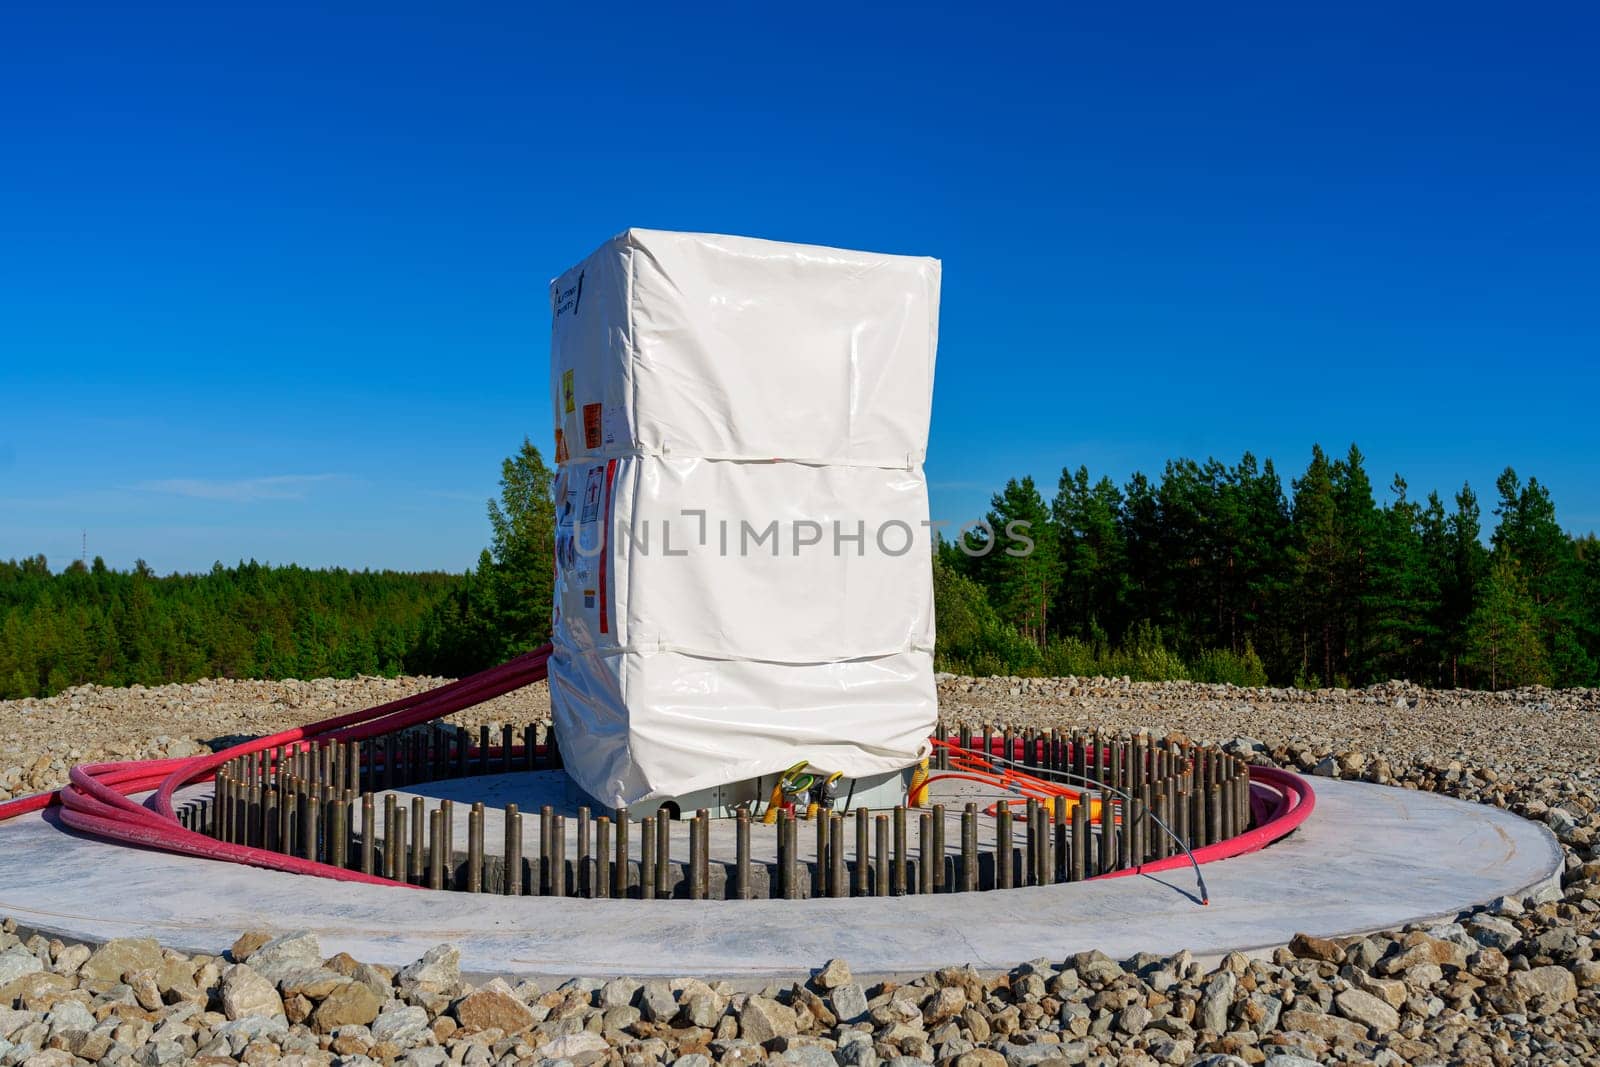 Installing First Heavy Components on Concrete Foundation for Future Wind Turbine by PhotoTime